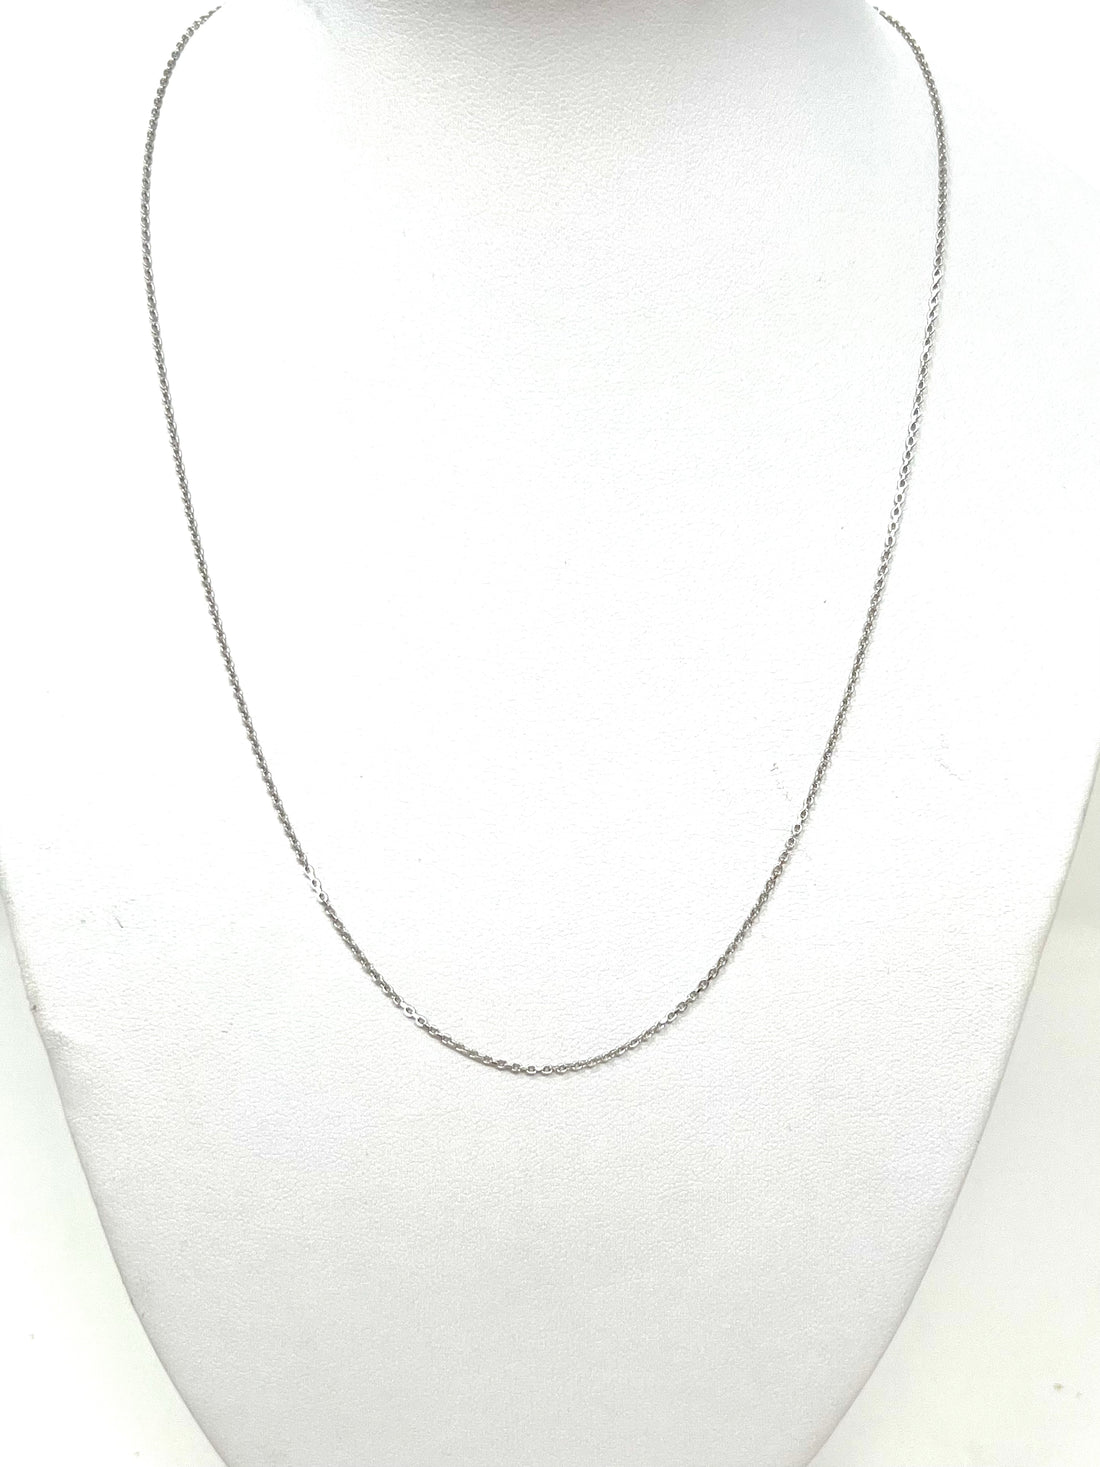 Charming 18” Delicate Chain in Silver